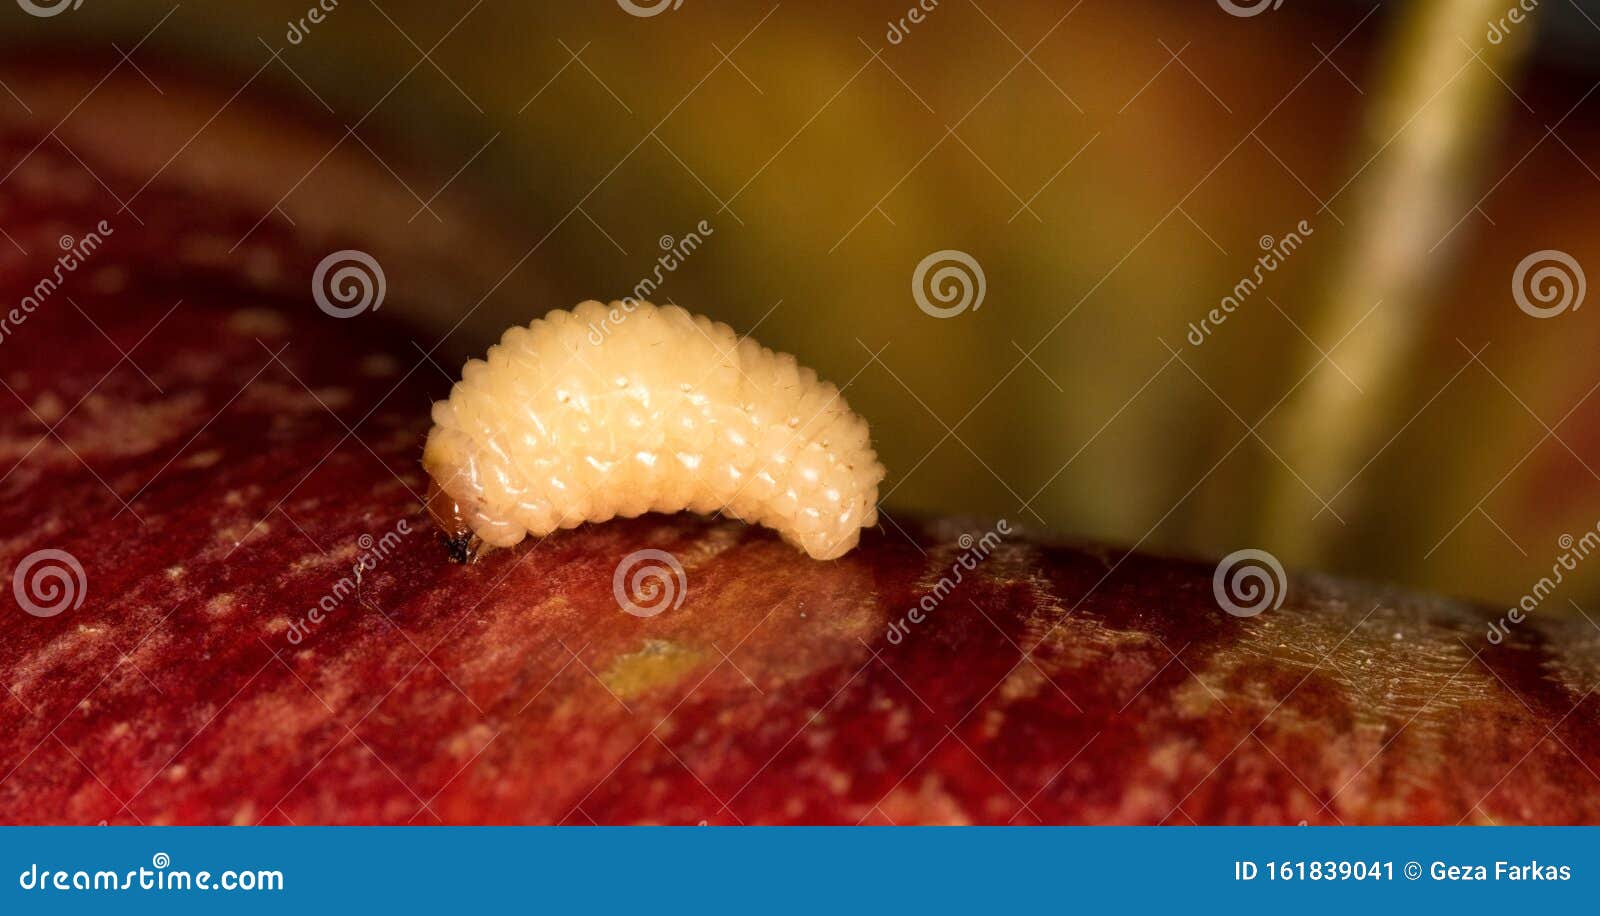 Worm in red apple stock image. Image of plant, fresh - 161839041